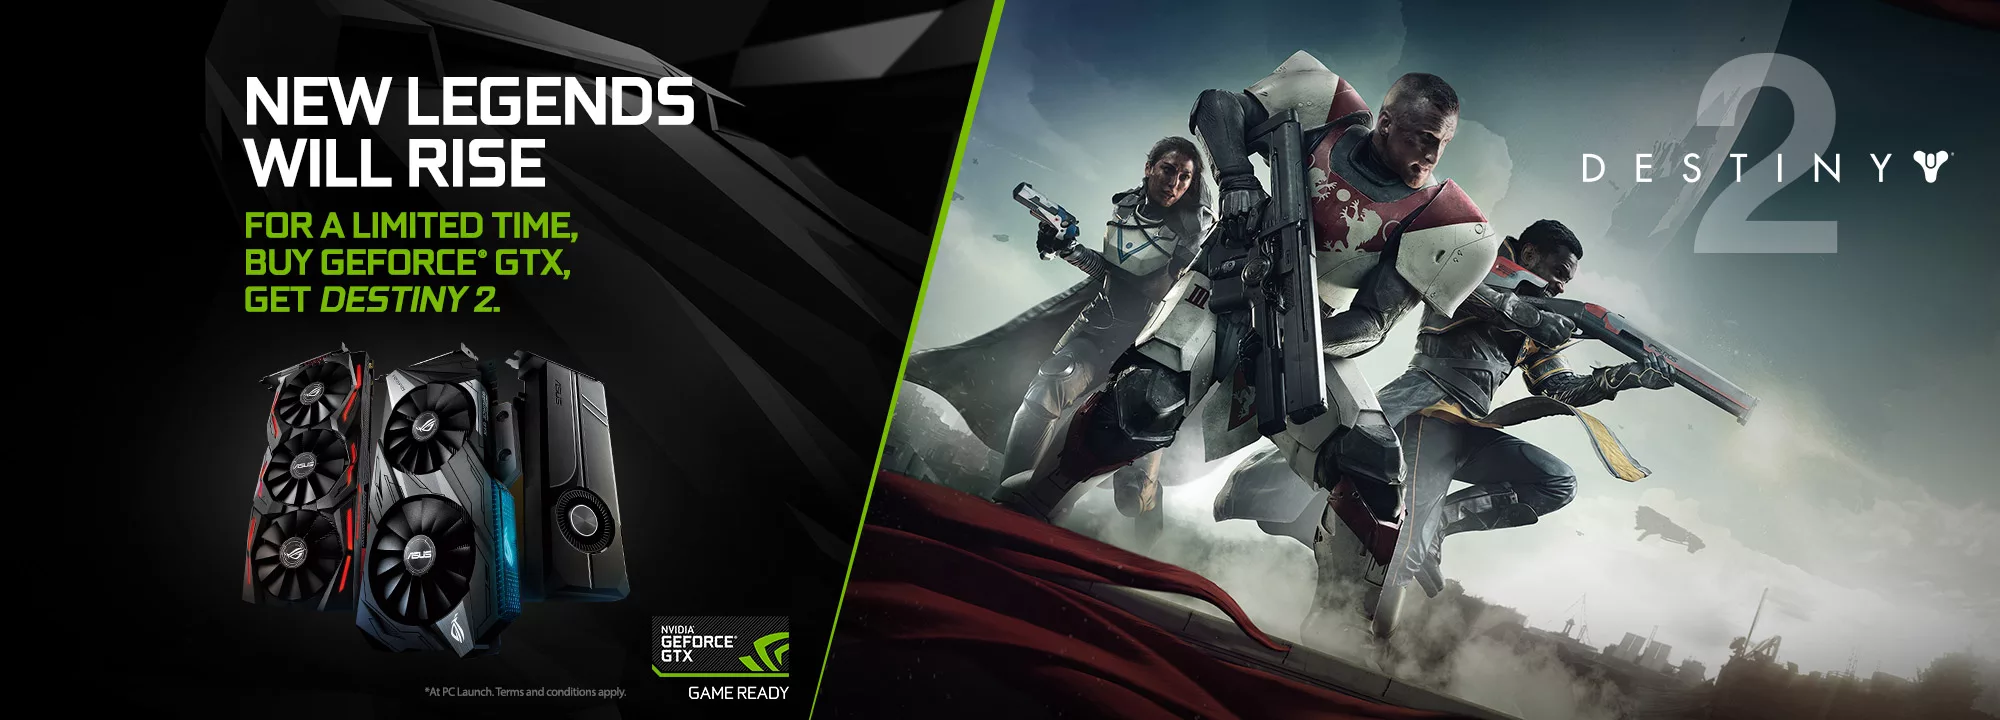 Destiny 2 is bundled with ASUS and ROG GTX 1080 and 1080 Ti graphics cards  | ROG - Republic of Gamers Global